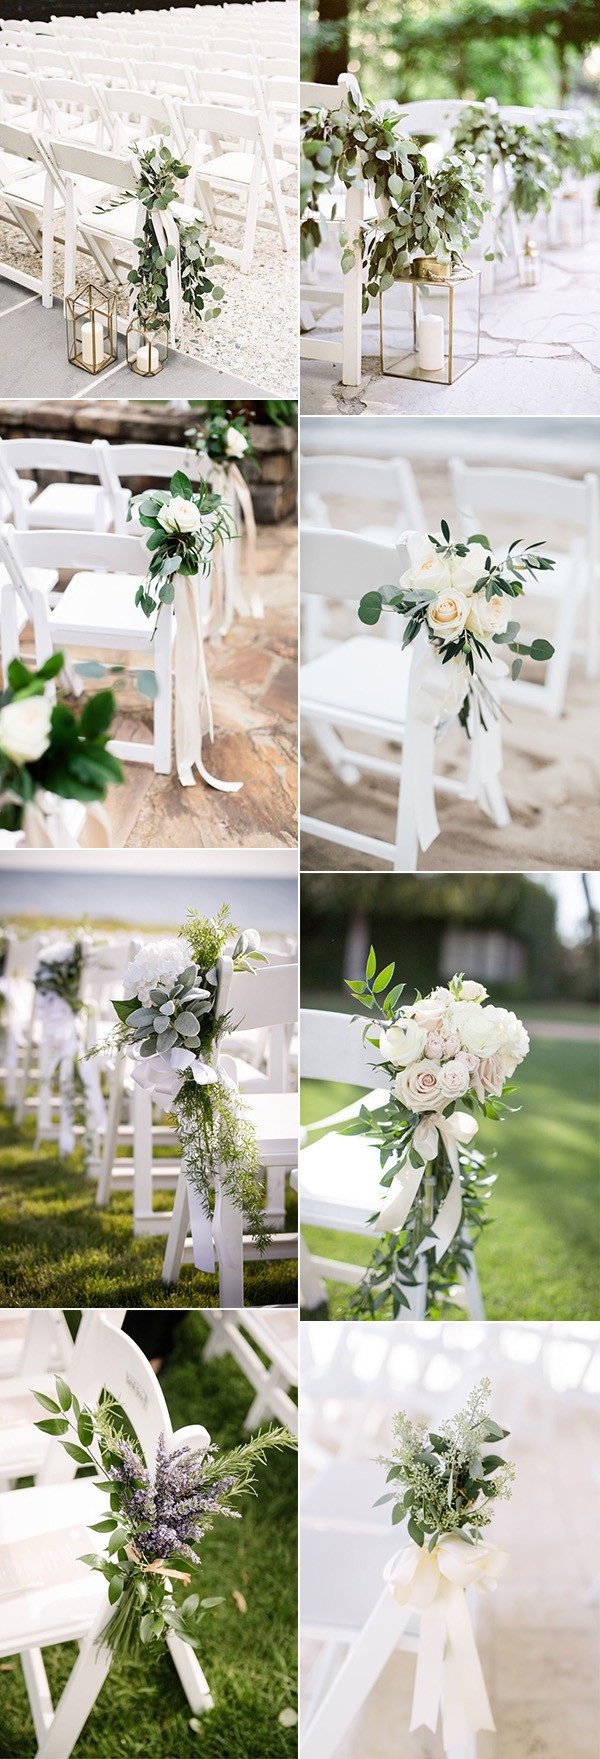 elegant outdoor wedding ceremony decoration ideas with white chairs